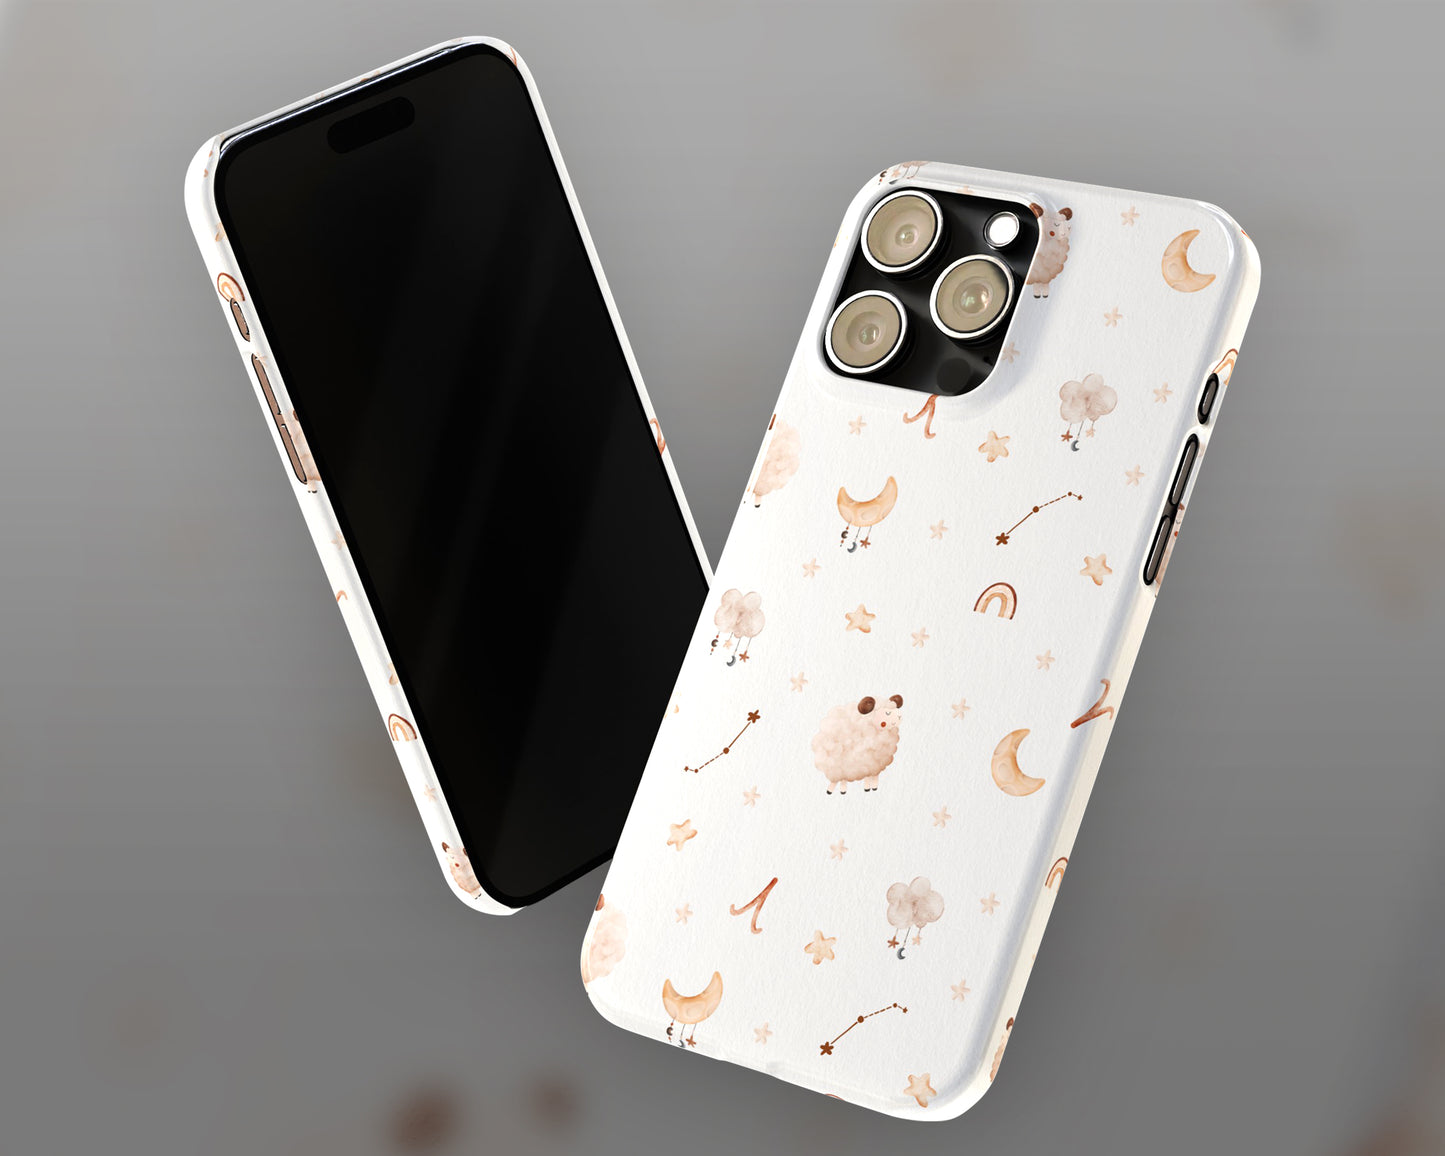 Aries Zodiac sign watercolor baby pattern iPhone case